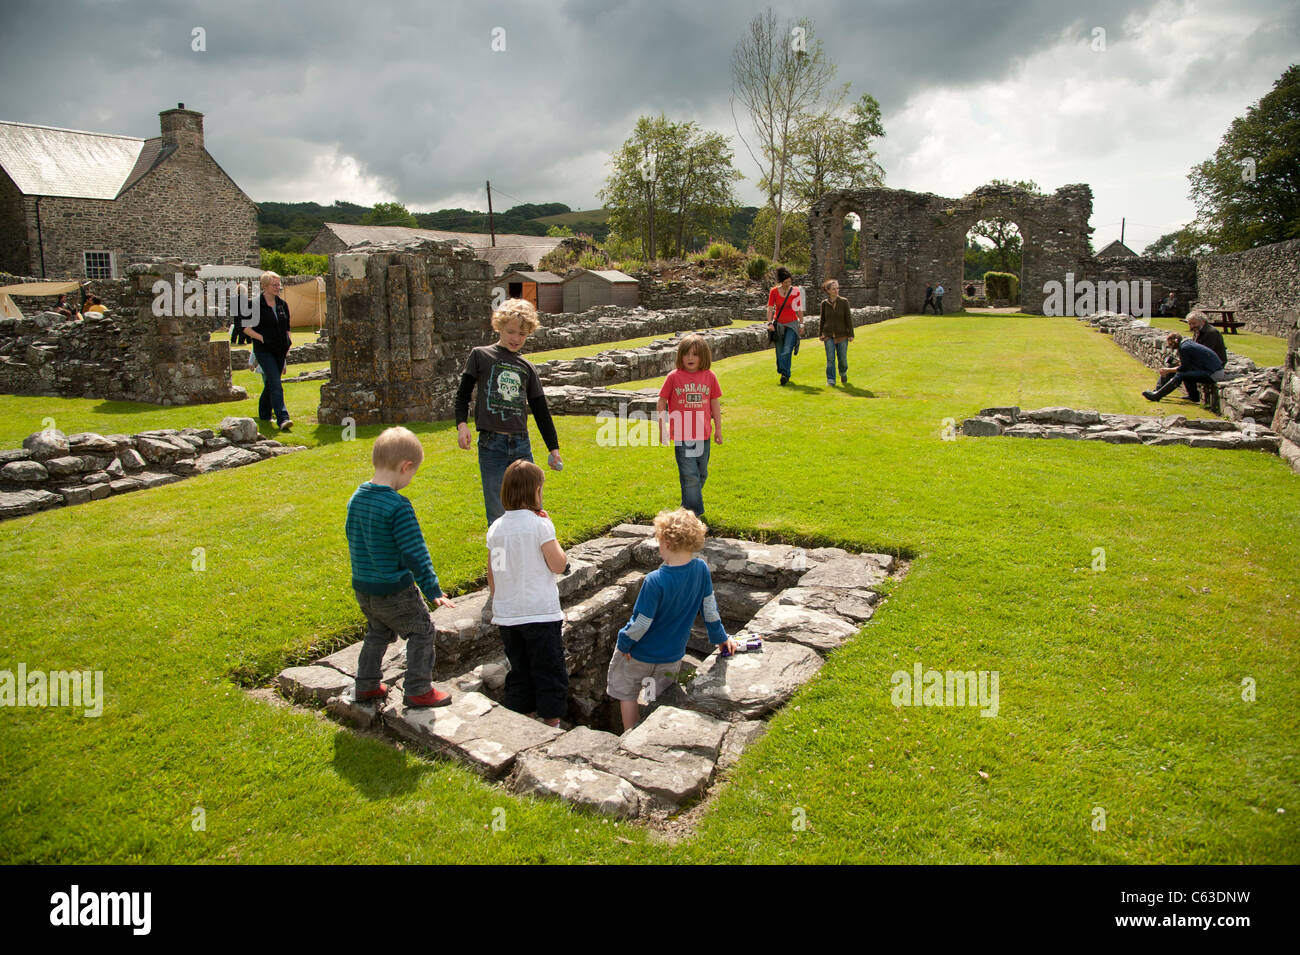 Visitors at Strata Florida / Ystrad Fflur ruined abbey, in the care of CADW, Ceredigion Wales UK Stock Photo